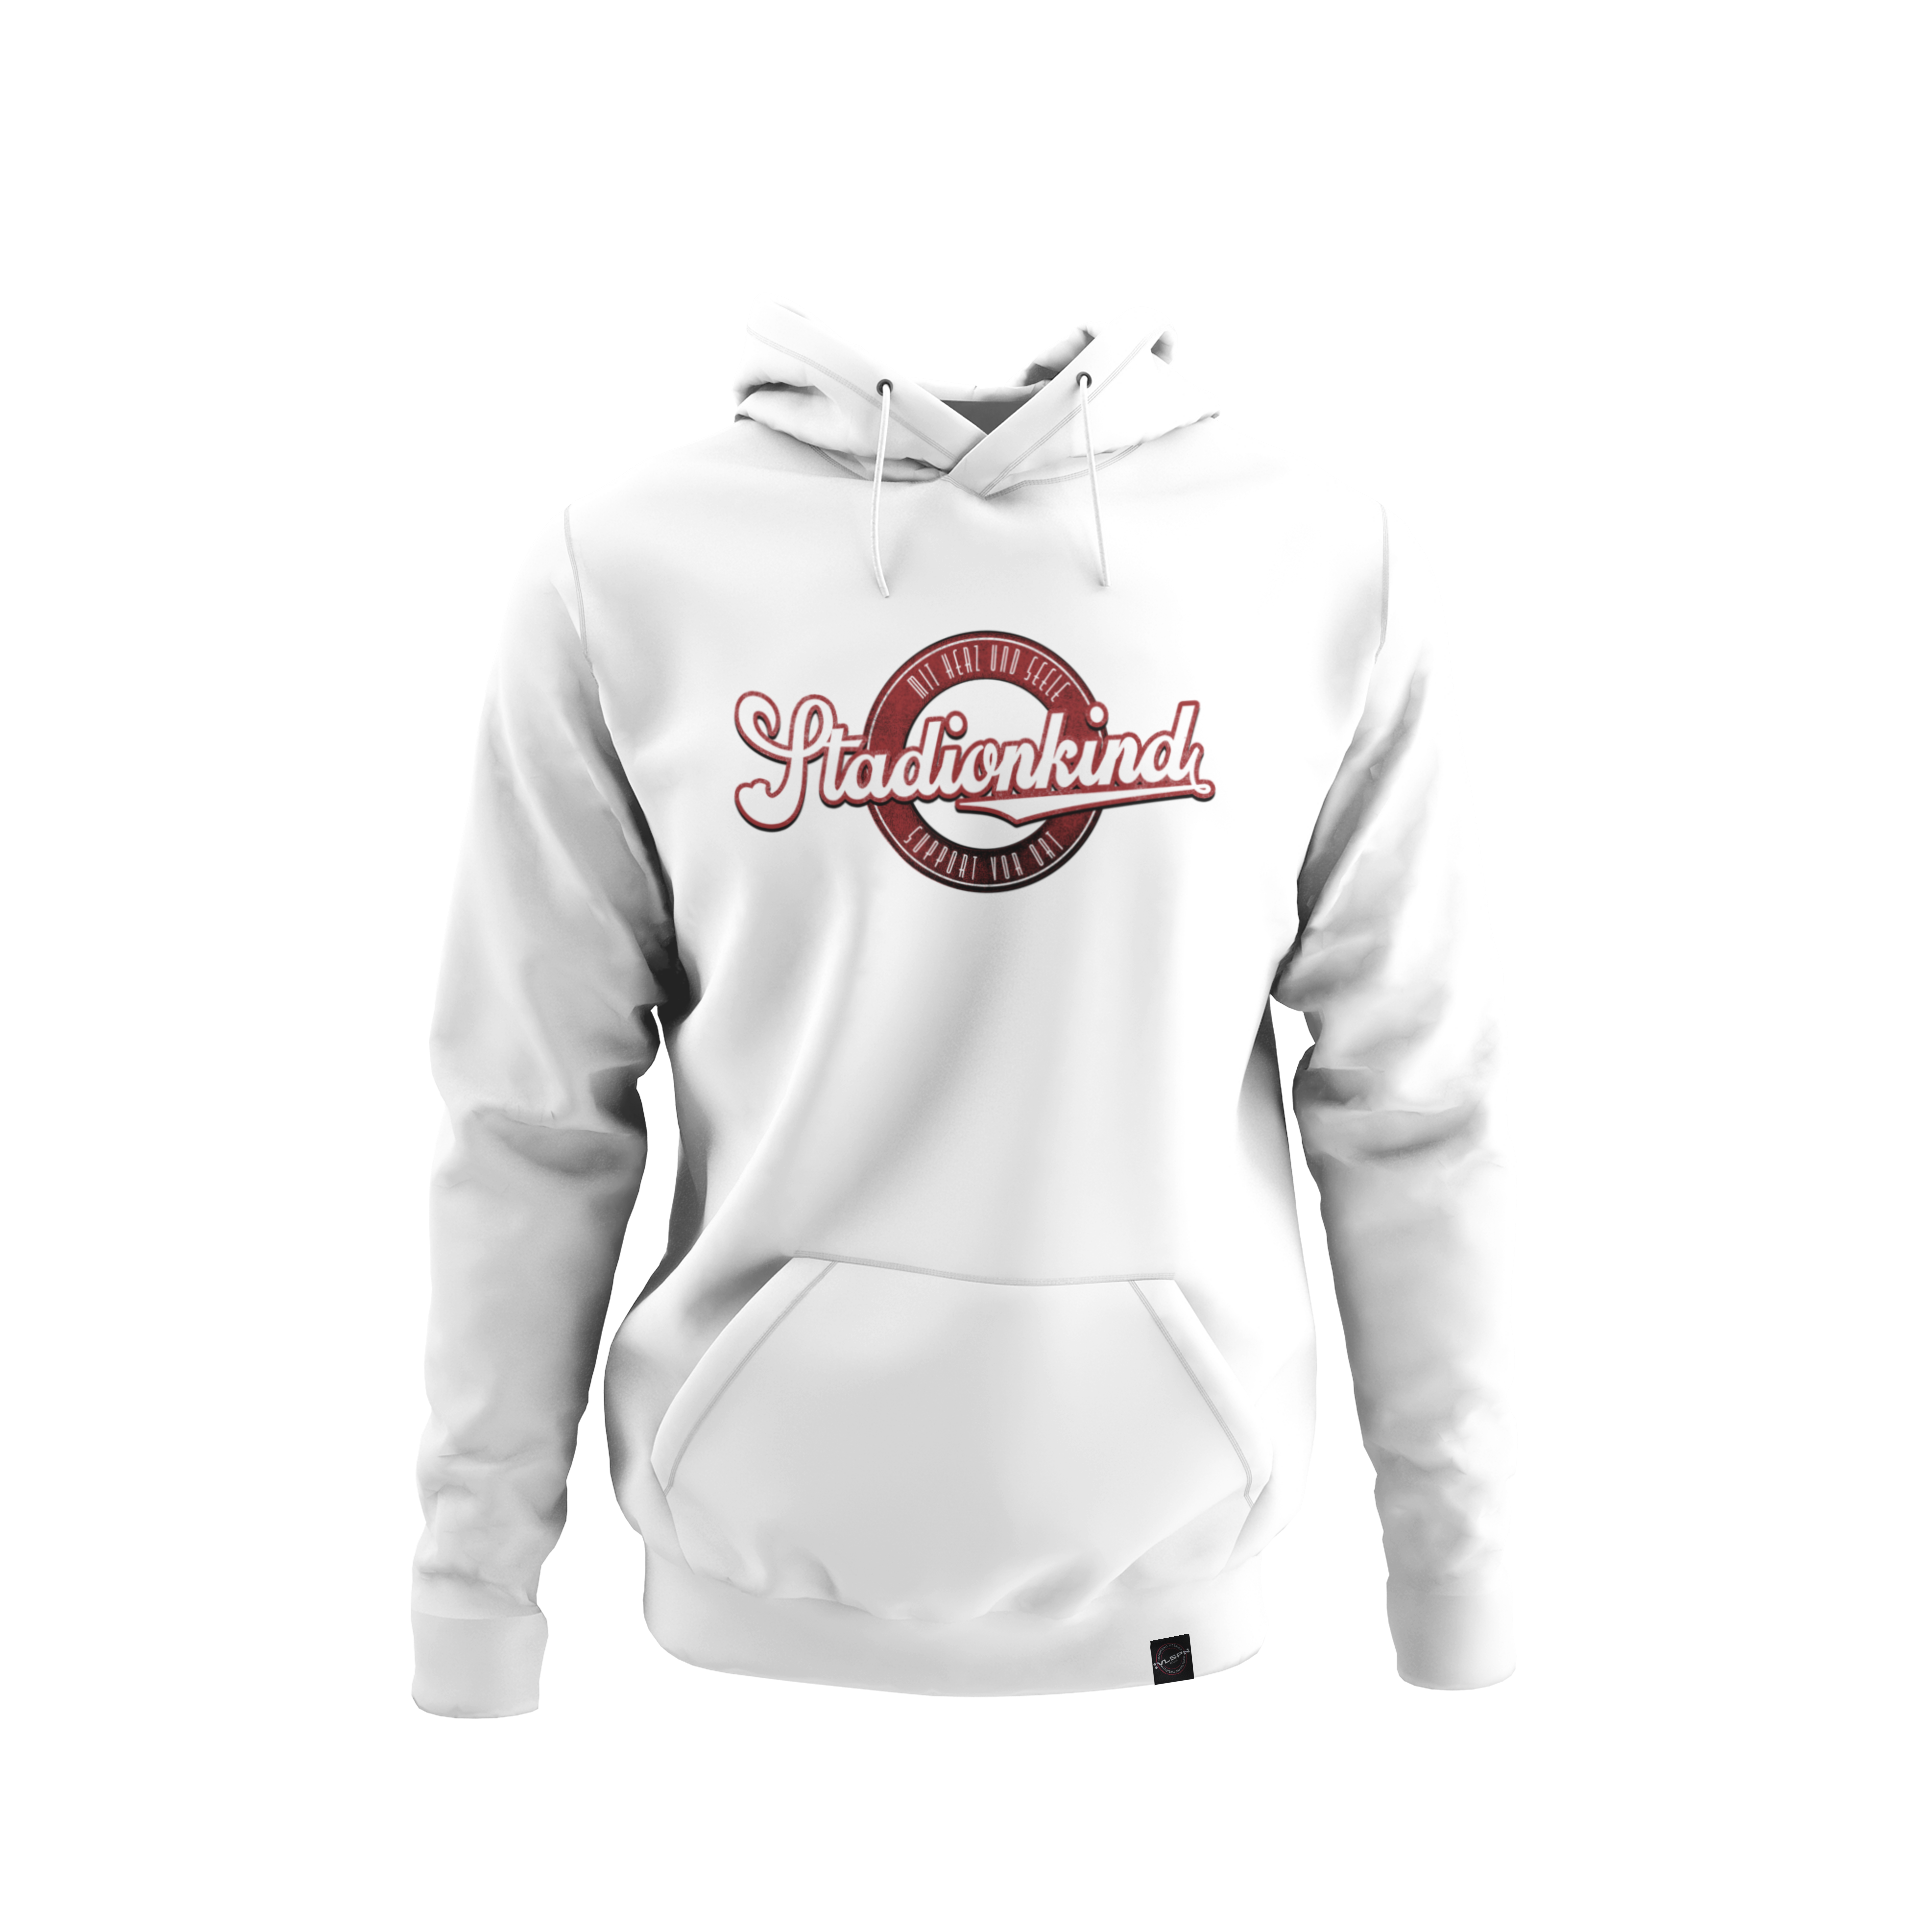 mockup-of-a-ghosted-pullover-hoodie-with-a-colored-background-4439-el1 - 2020-08-31T172337.362.png